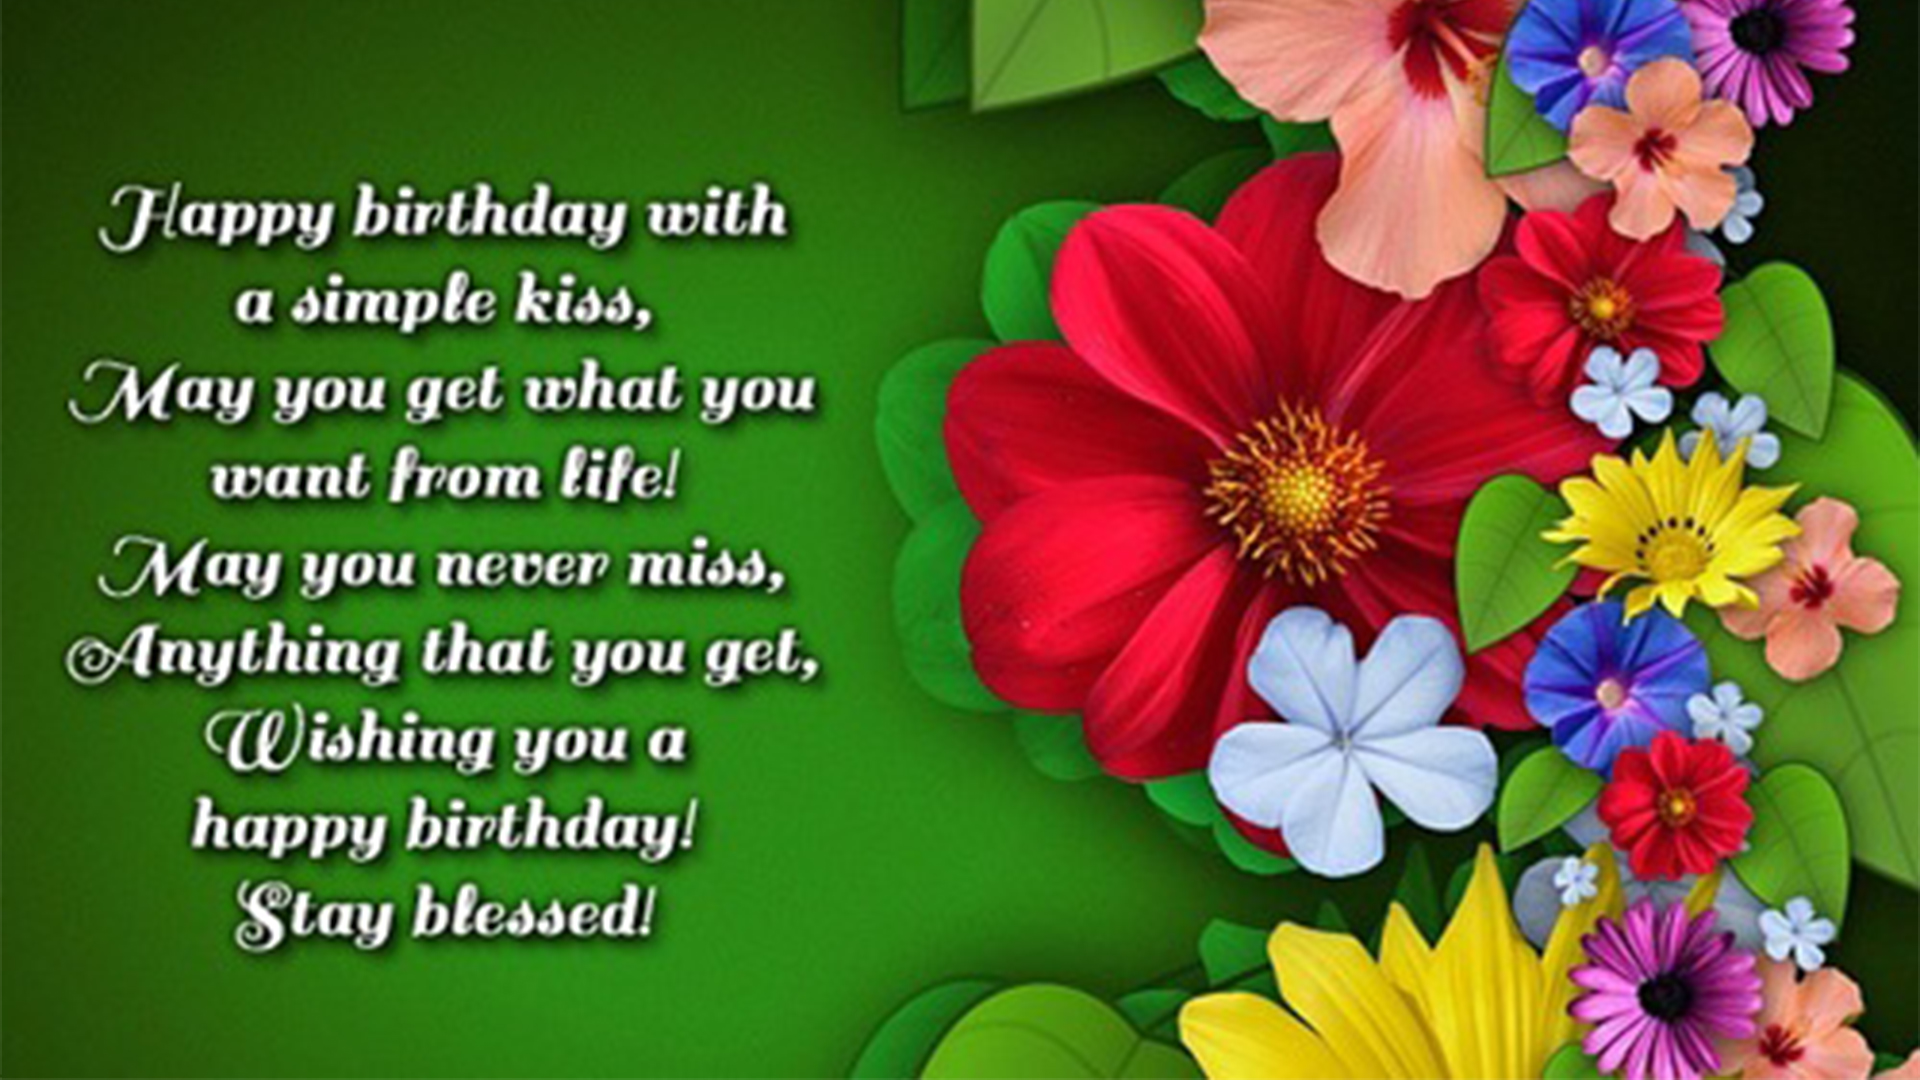 birthday messages hd image